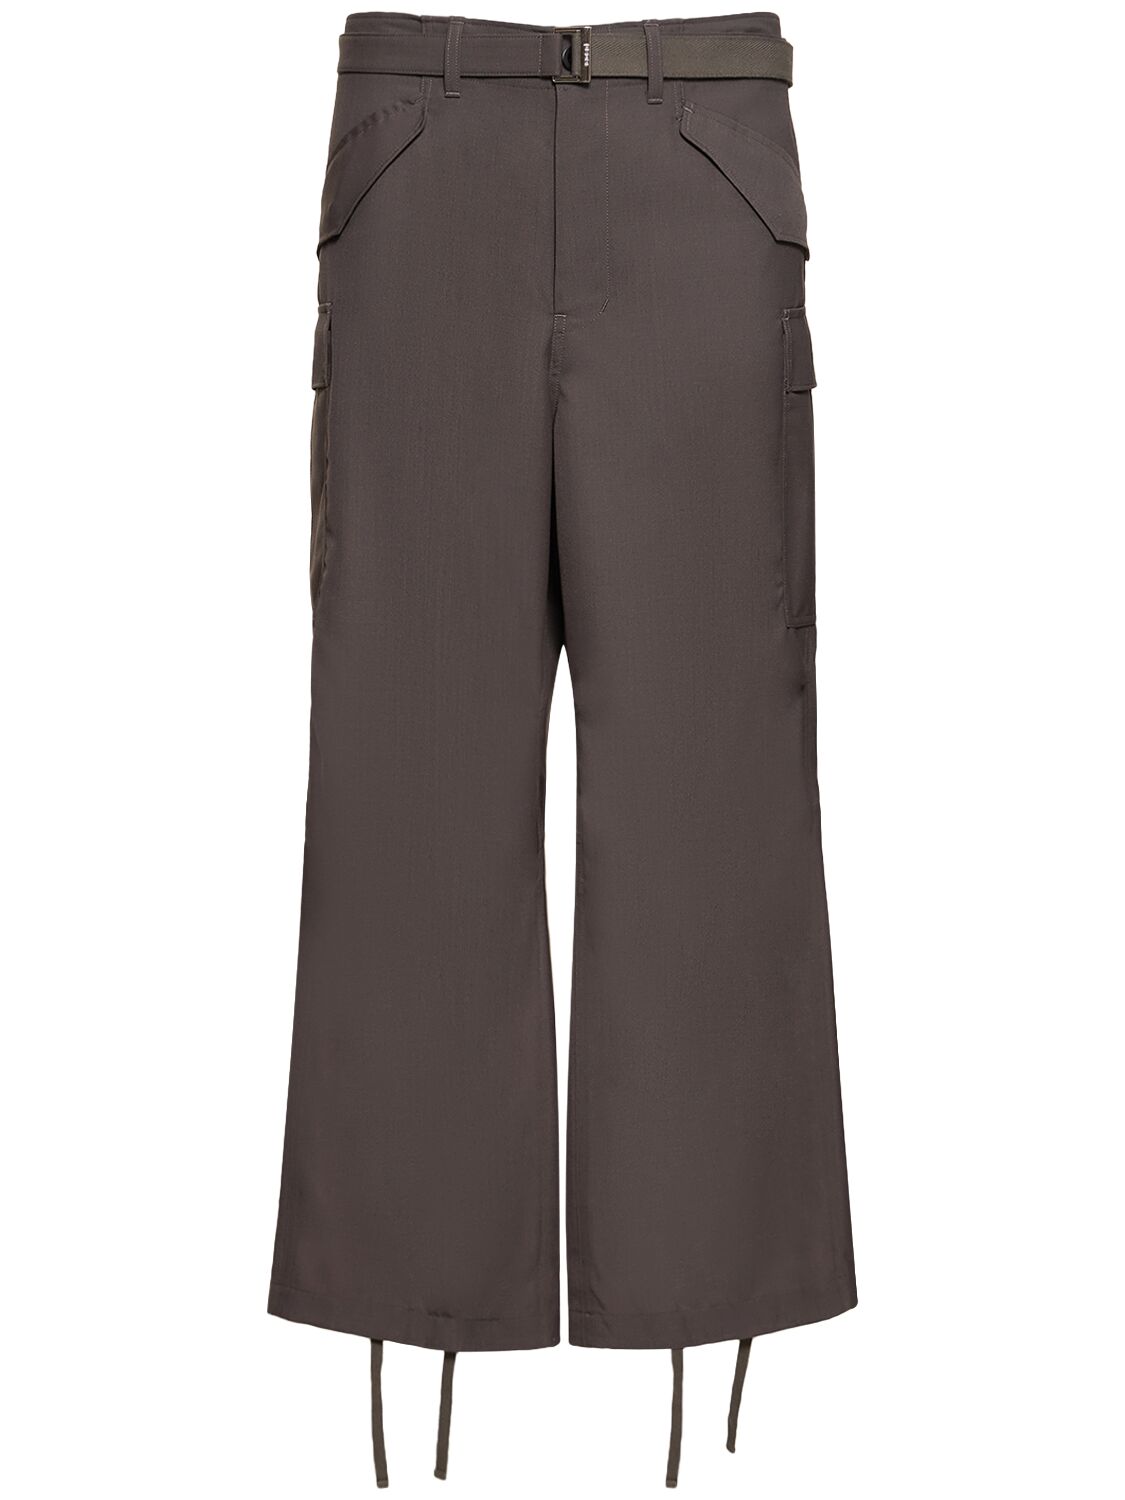 Sacai Tailored Suiting Pants In Taupe